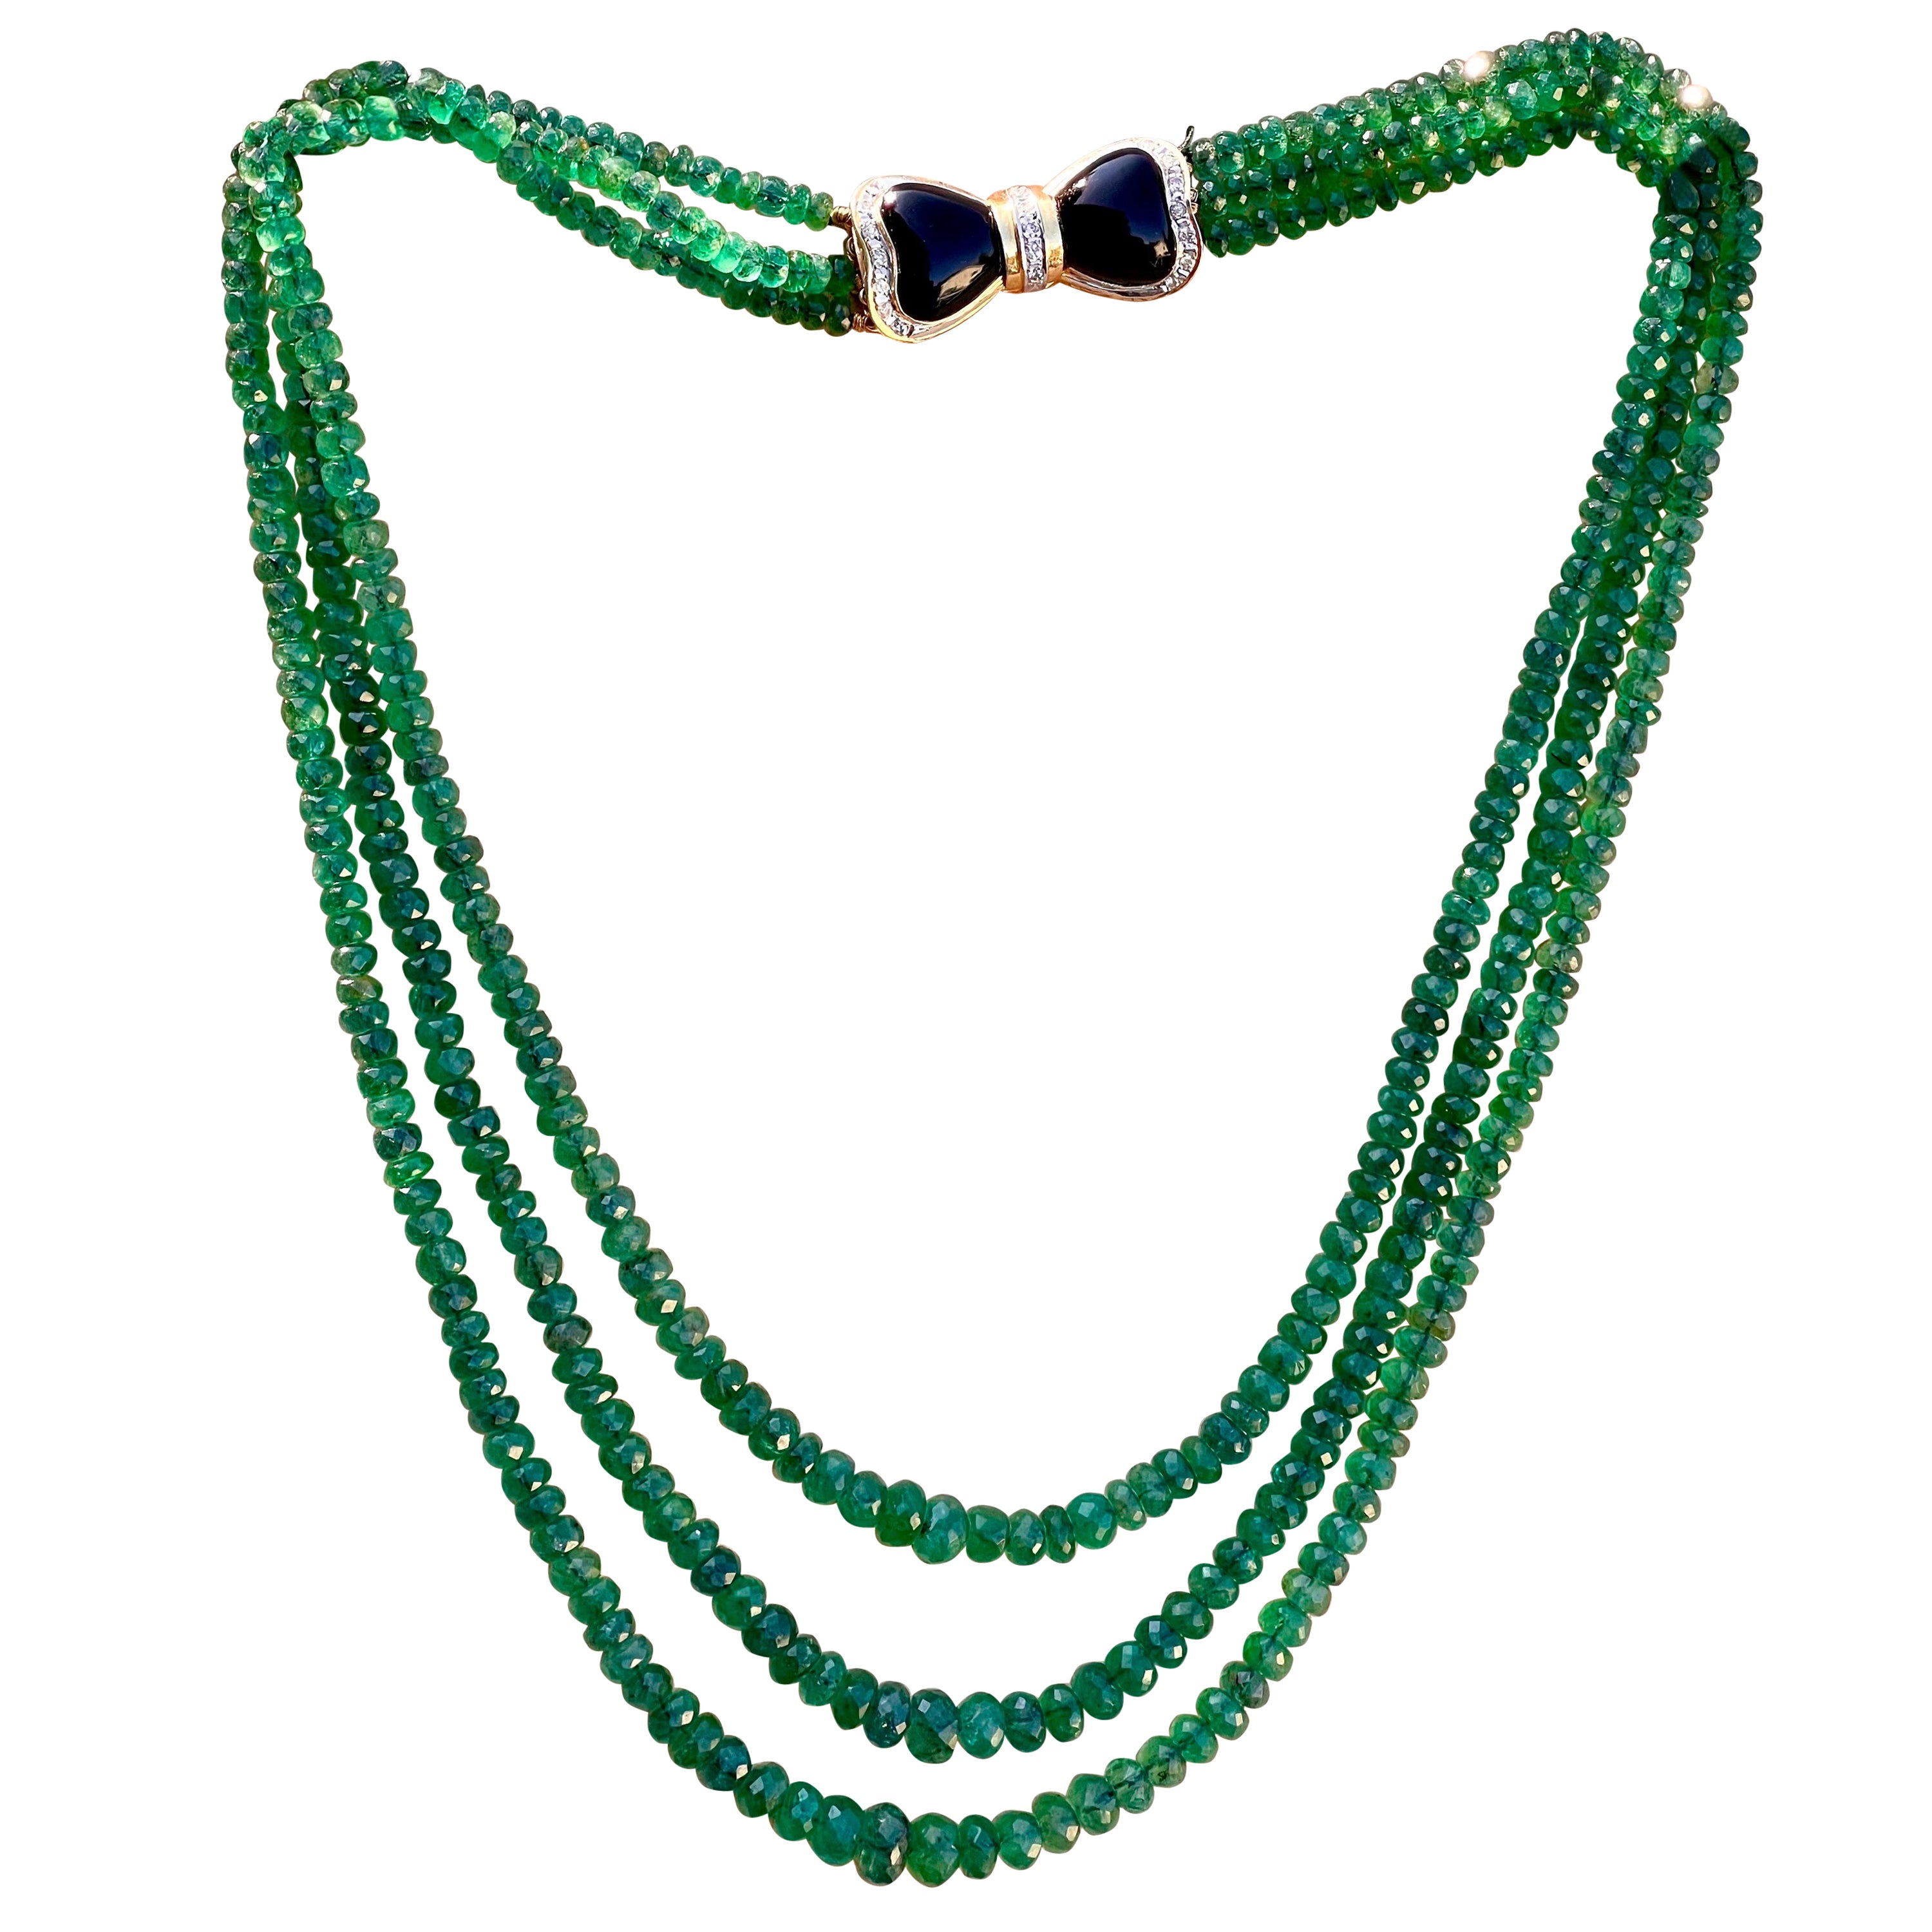 240 Ct Fine Natural Emerald Beads 3 Line Necklace with Black Onyx 14 Kt G Clasp